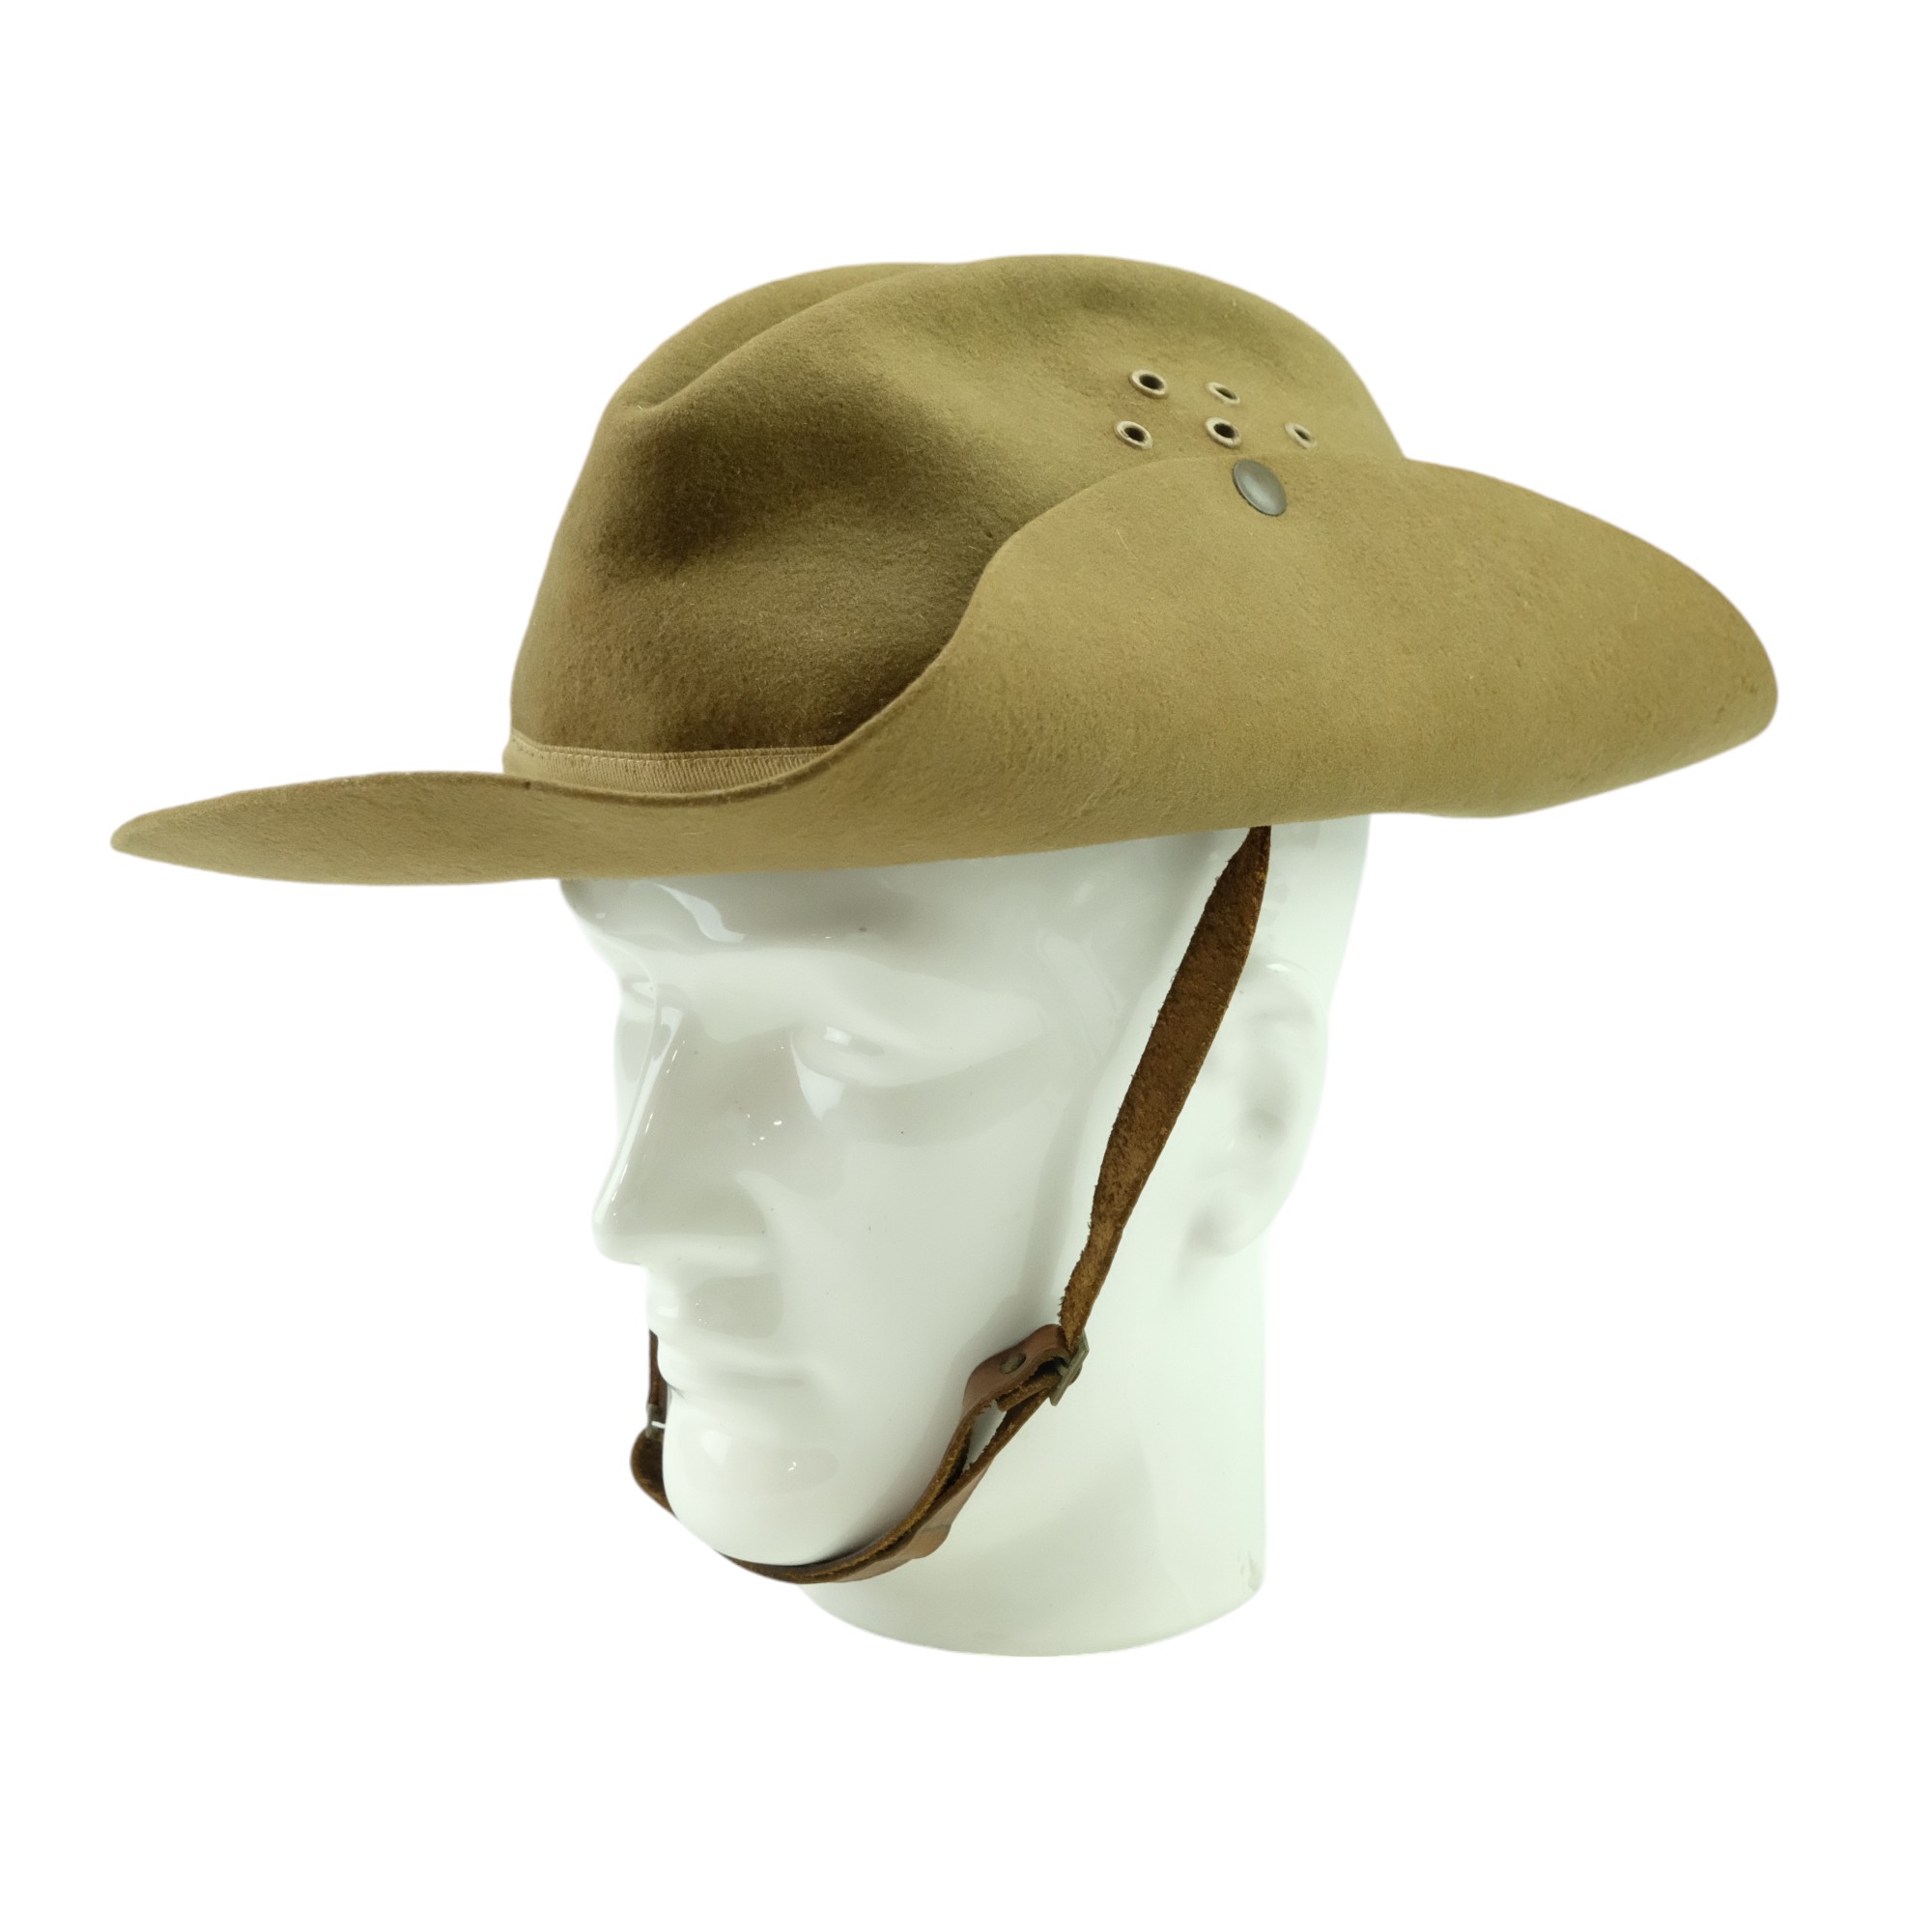 A 1945 Royal Army Medical Corps officer's bush hat, bearing the inscribed name Lieut Frith and an